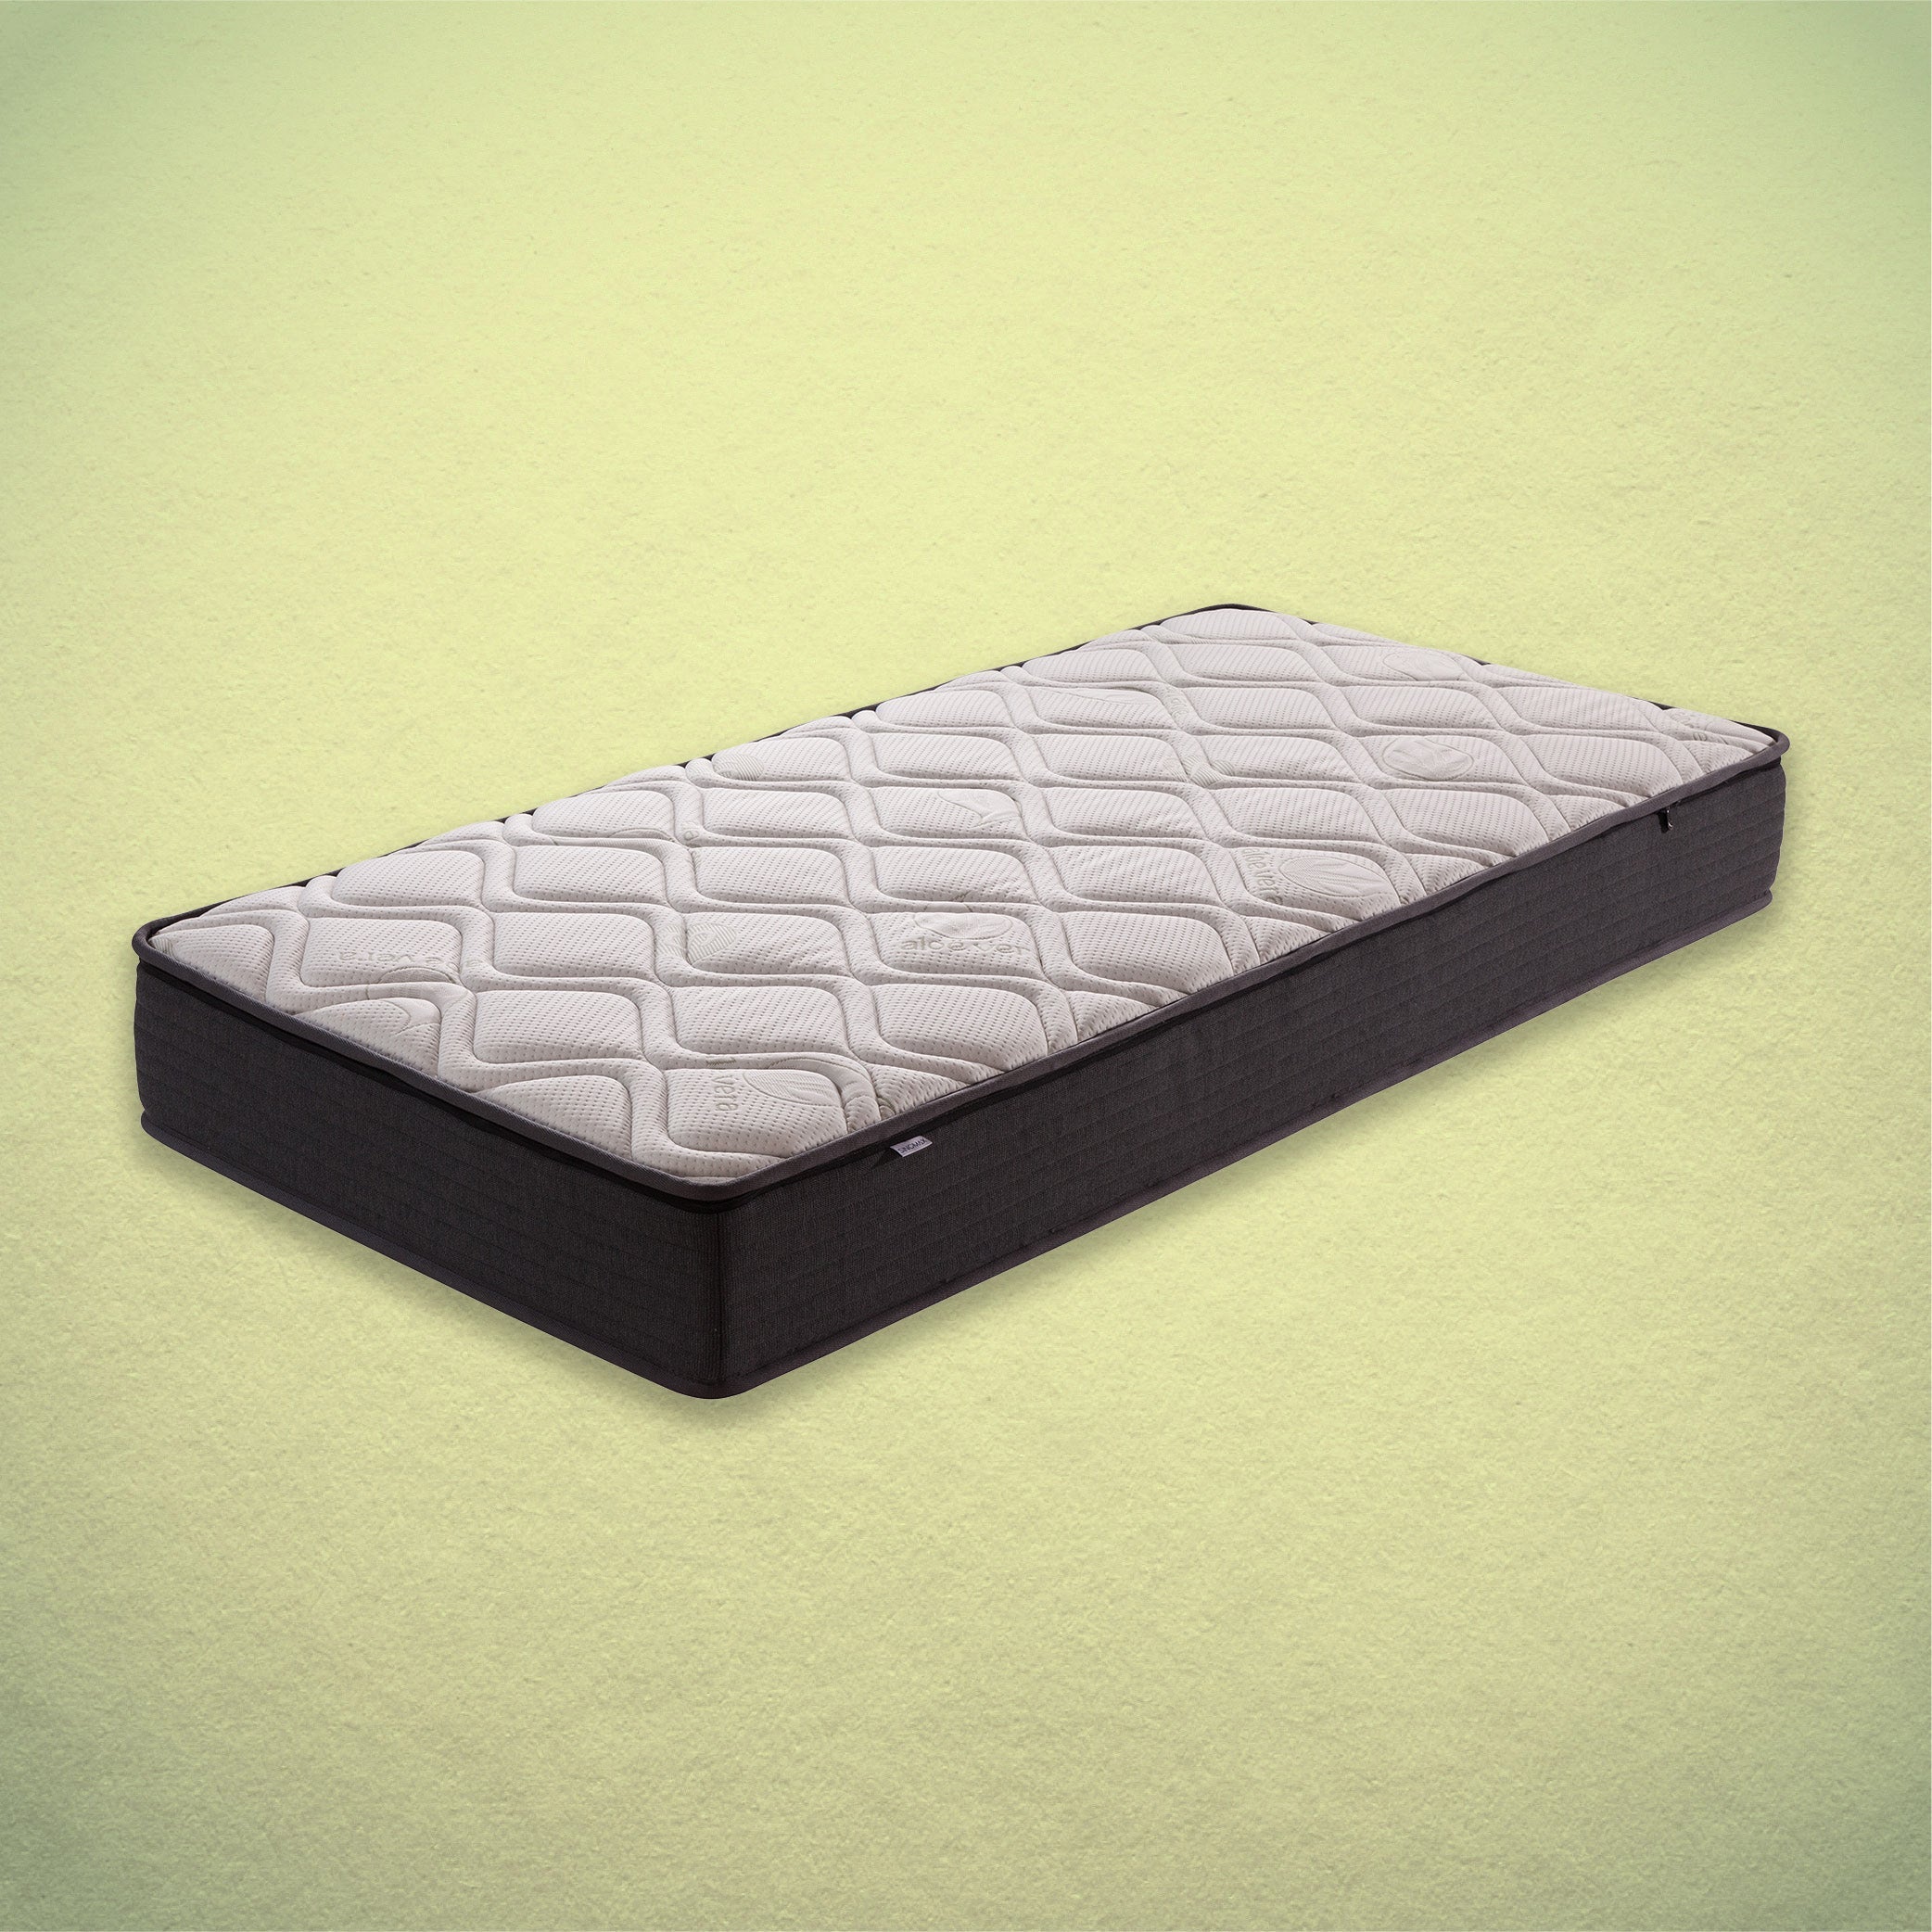 S-Care Comfort Mattress - Tailor-made size (48" W or below)